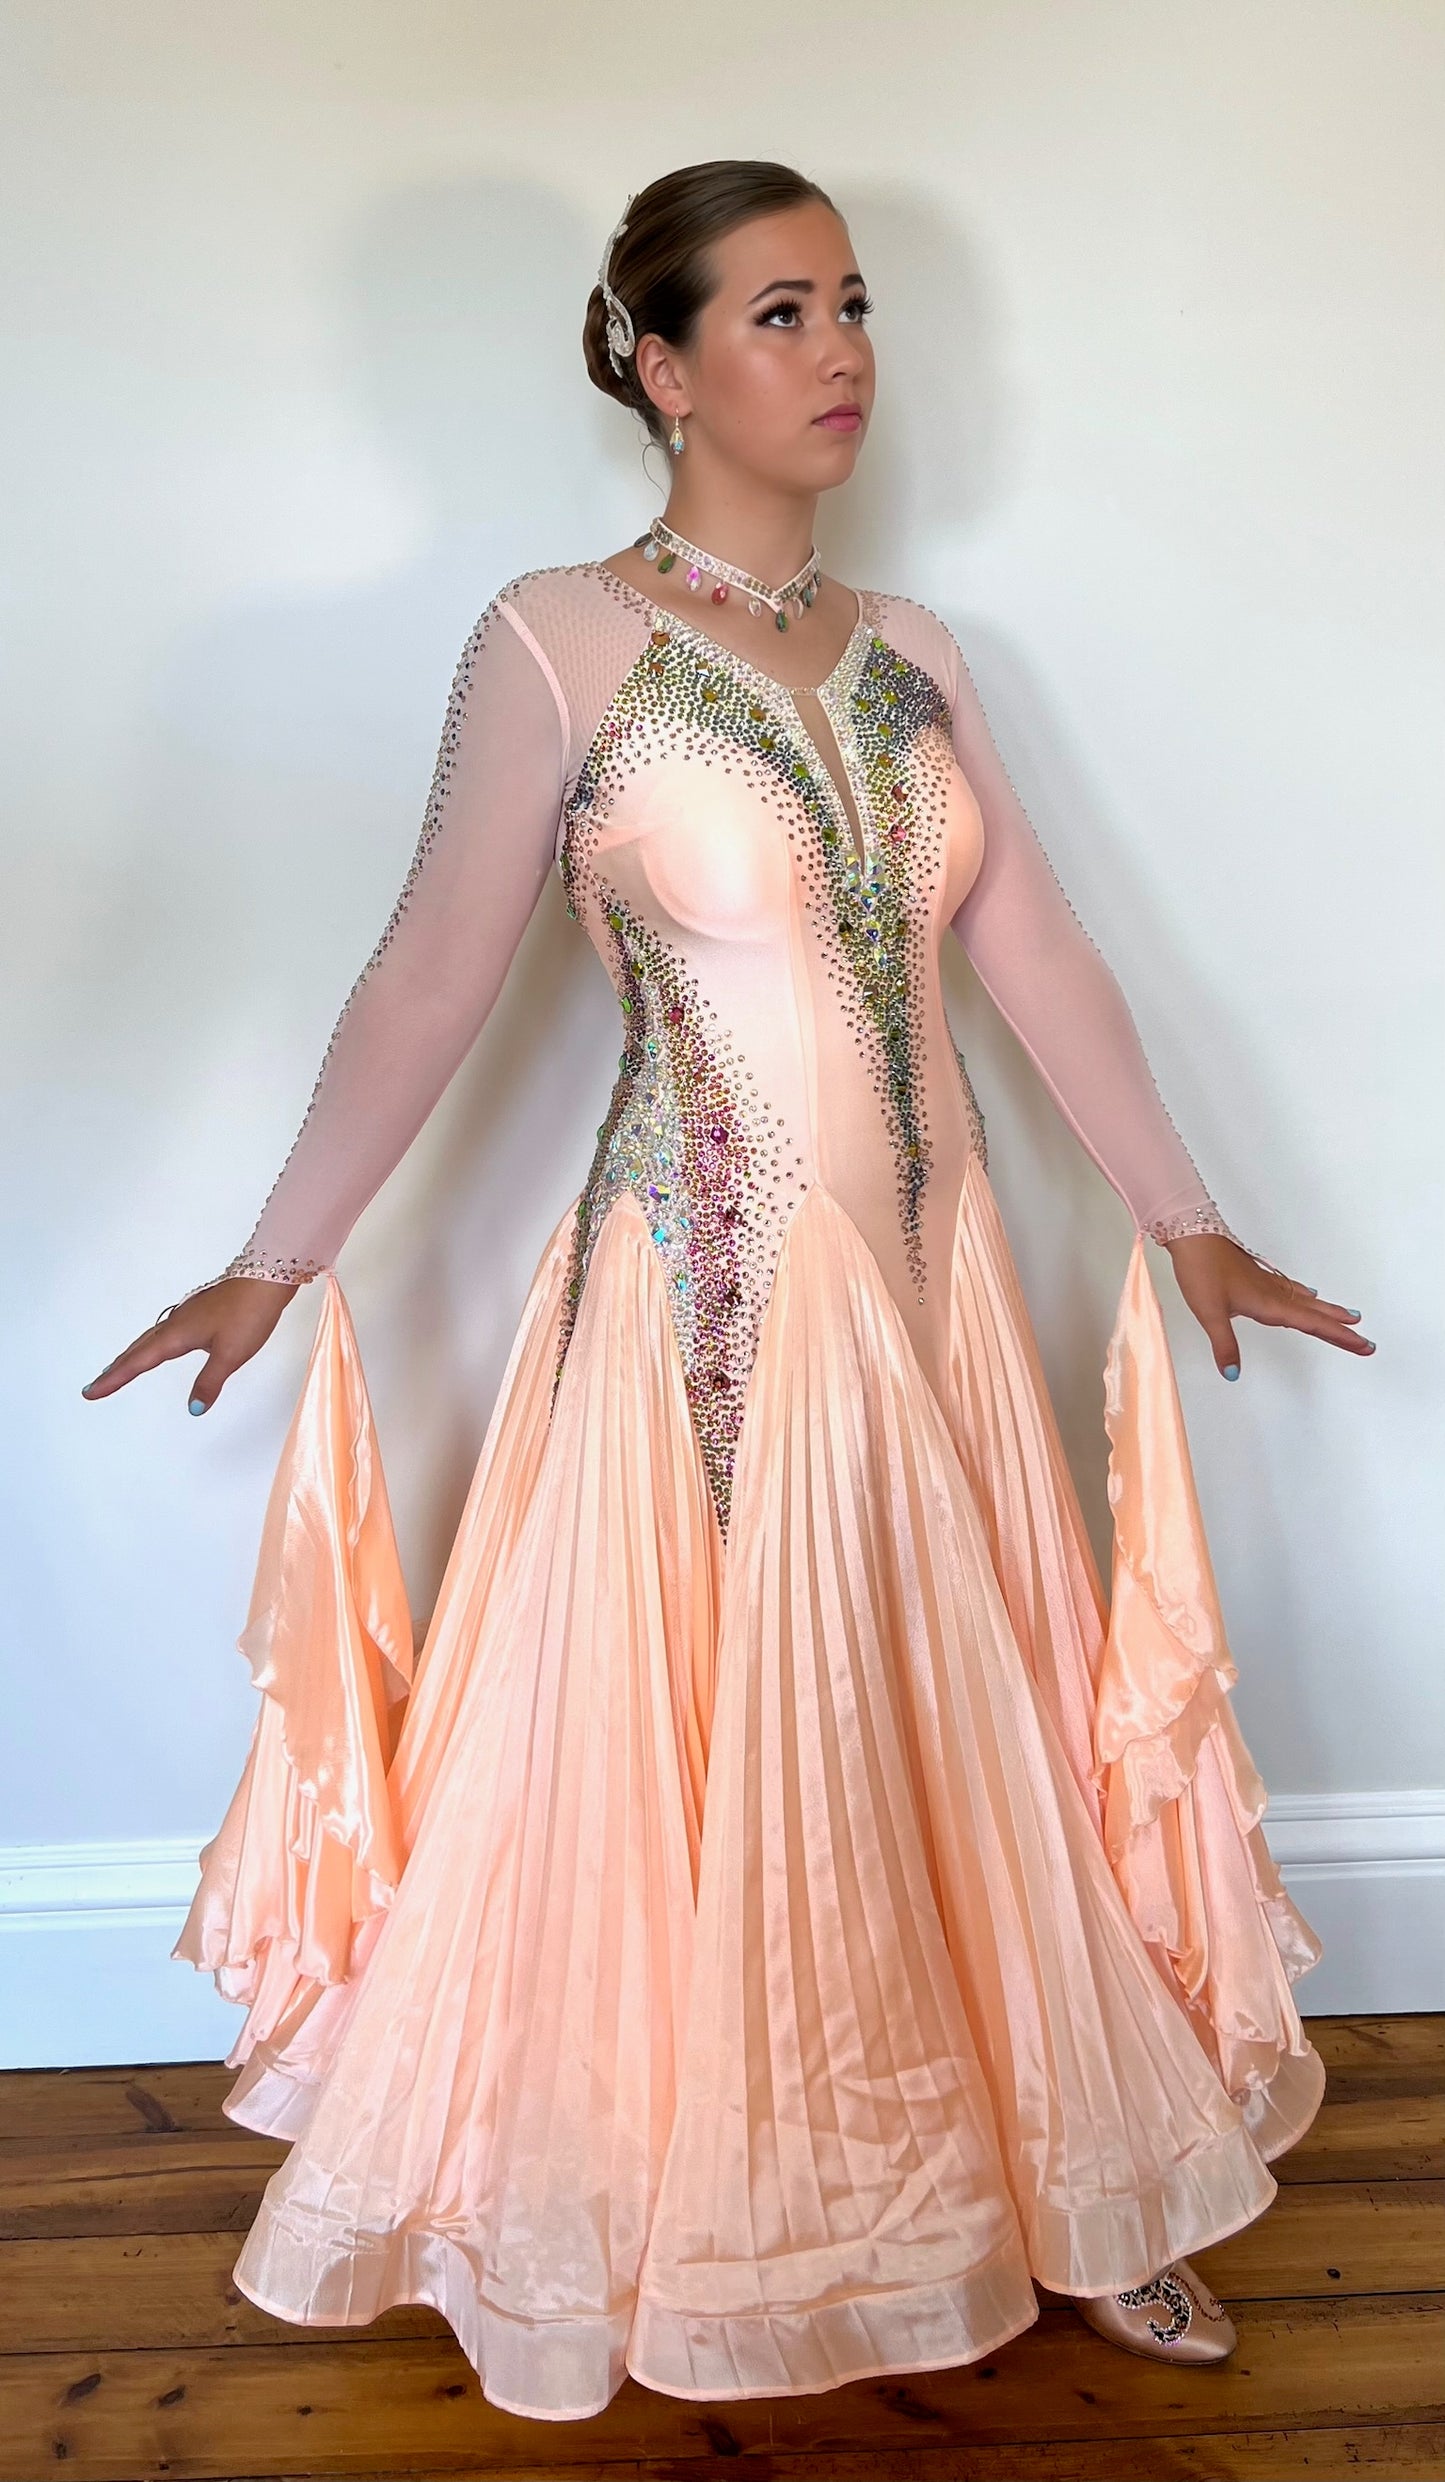 229 Peach Pleated Skirt Ballroom Dress. Rainbow & peach stoning. High back & mesh sleeves with floats attached.